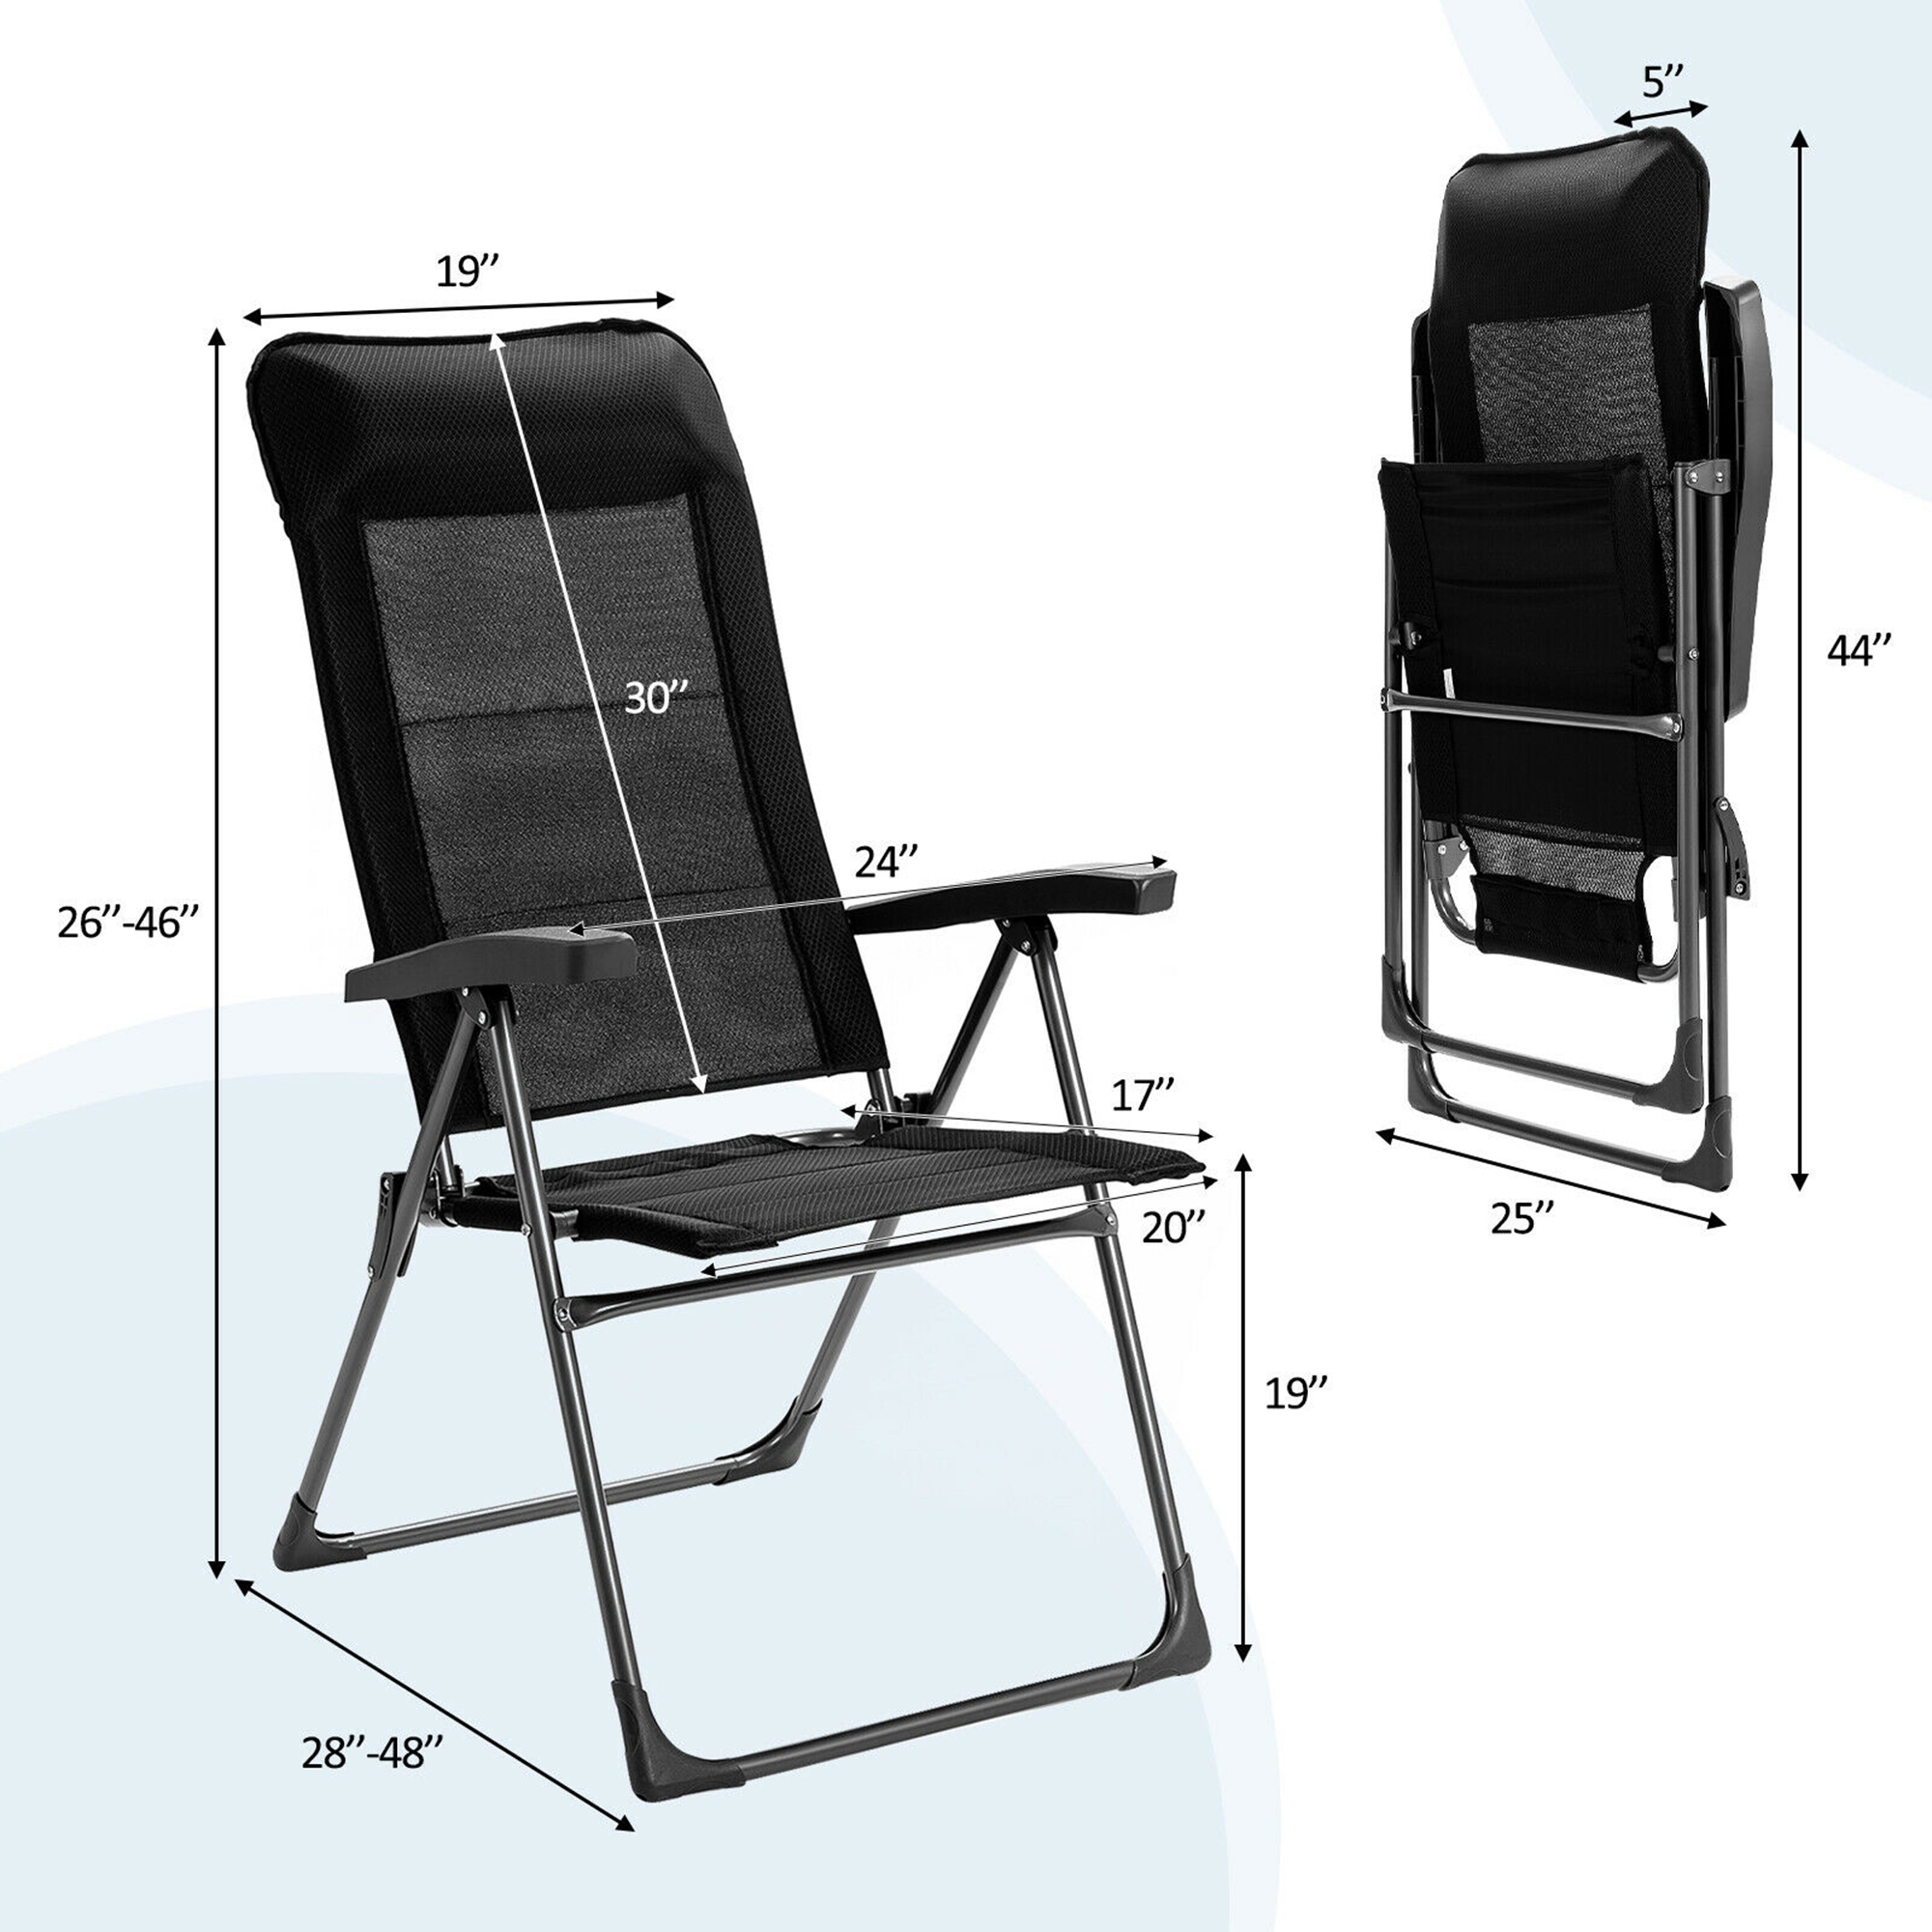 Gymax 2PCS Patio Folding Dining Chairs Portable Camping Headrest Adjust Black - image 2 of 10